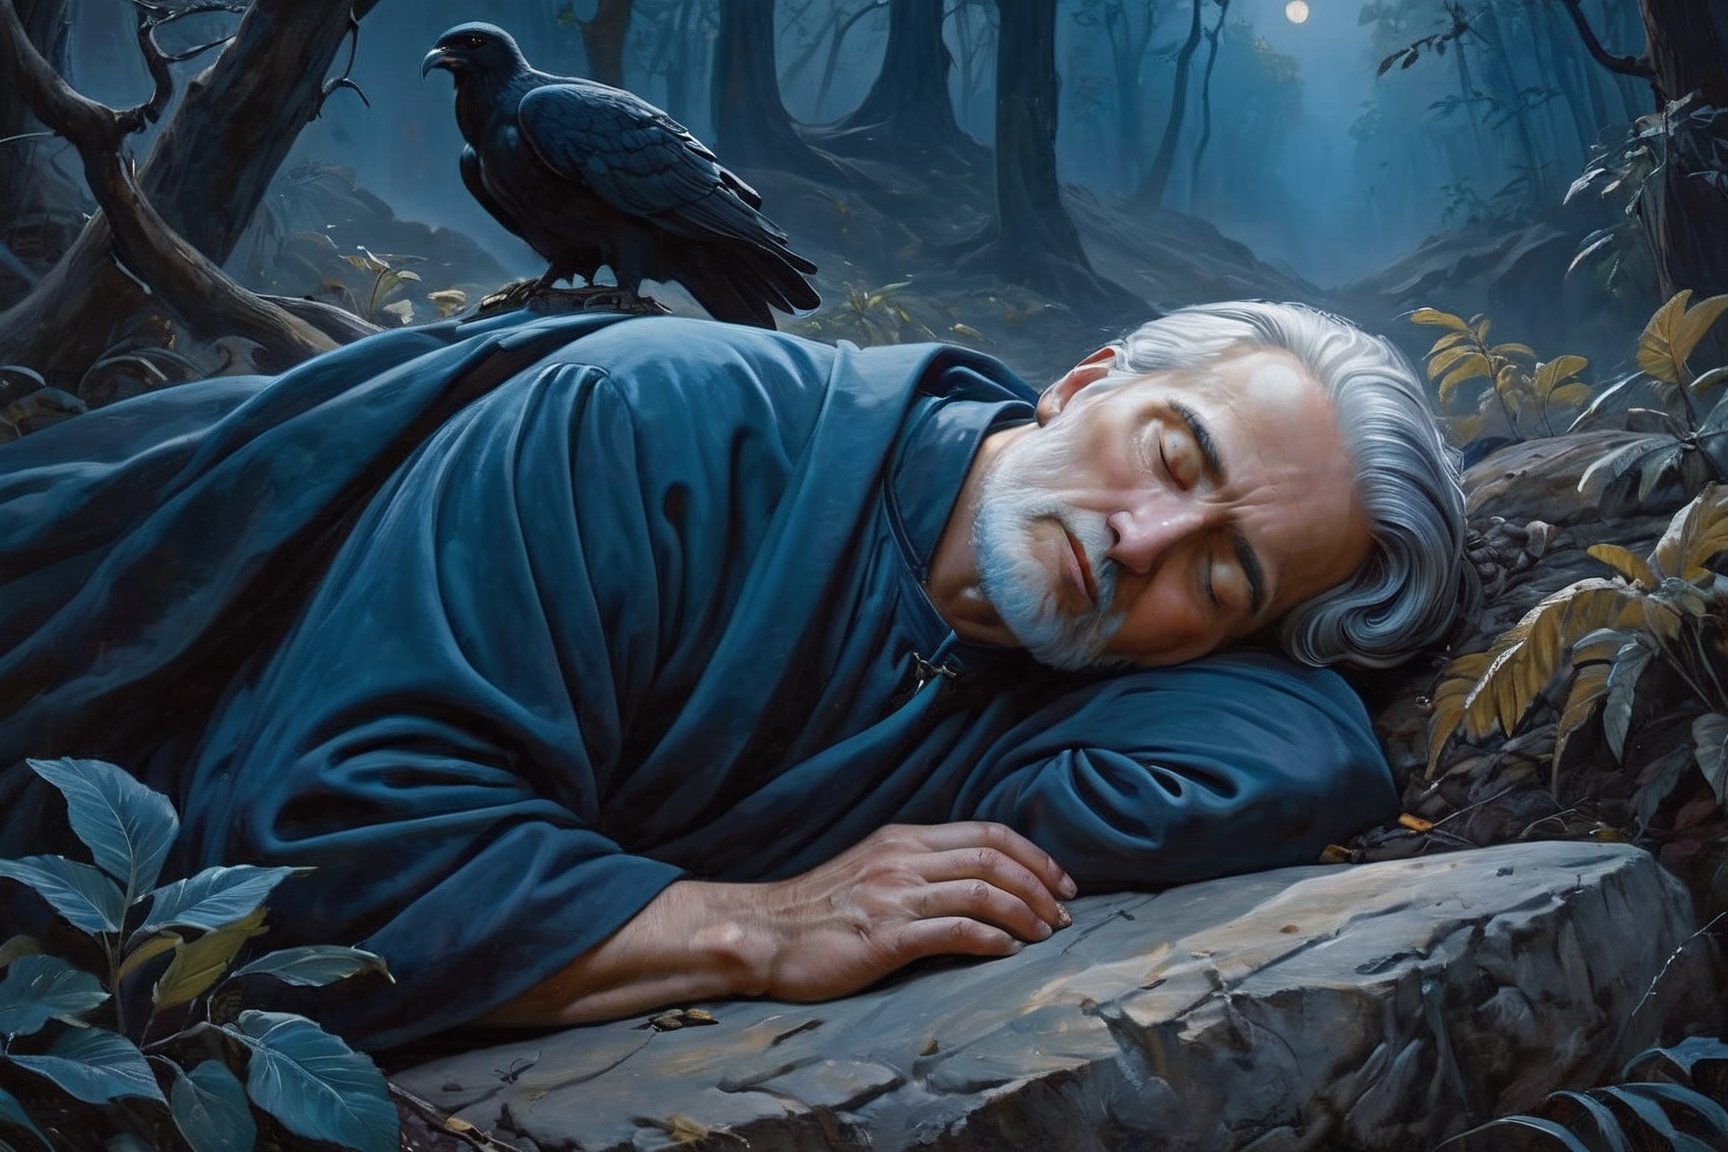 hyper detail, (eyes closed)(classical realism painting: 1.75) in profile, the wingless patriarch Jacob sleeping on a stone, in the middle of a dry forest, (ASLEEP) while in the distance angels are seen climbing up a staircase, depth of field, fine detail, subsurface dispersion, (dark shadows in the background: 1.75), color gradient from 'golden color' to 'dark blue' backlight